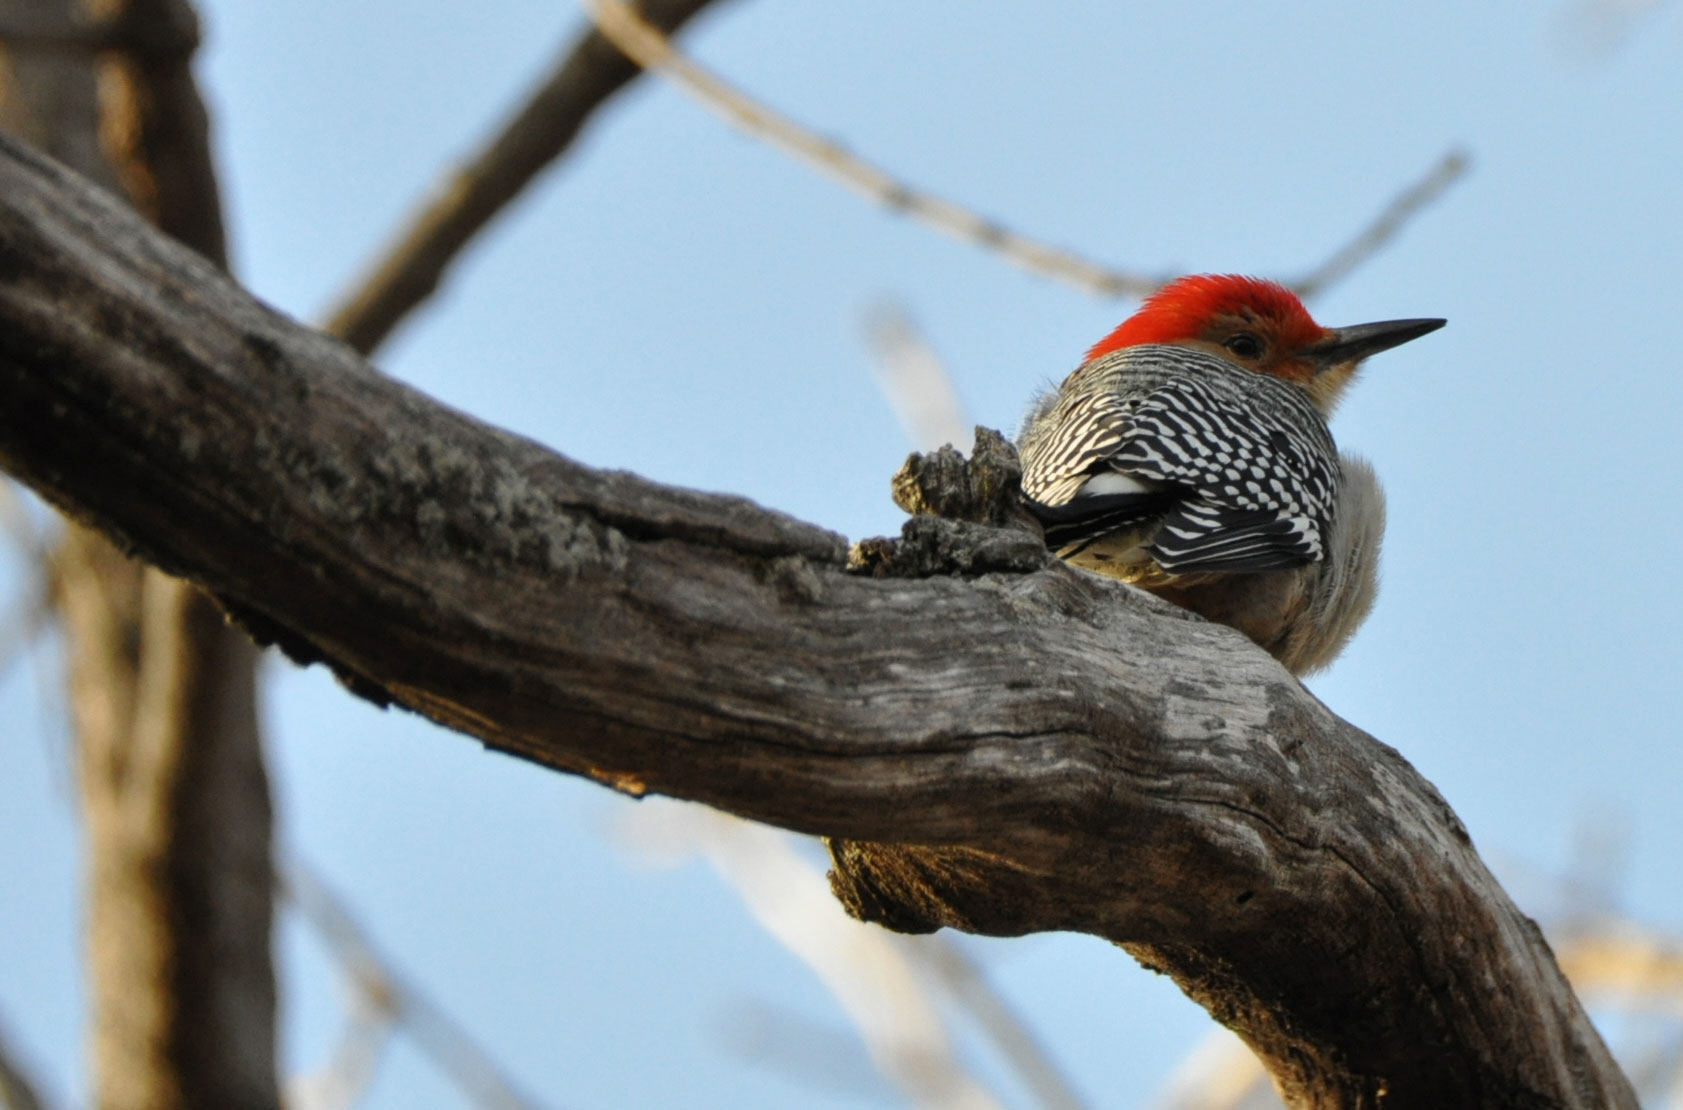 A red-bellied woodpecker on a branch.